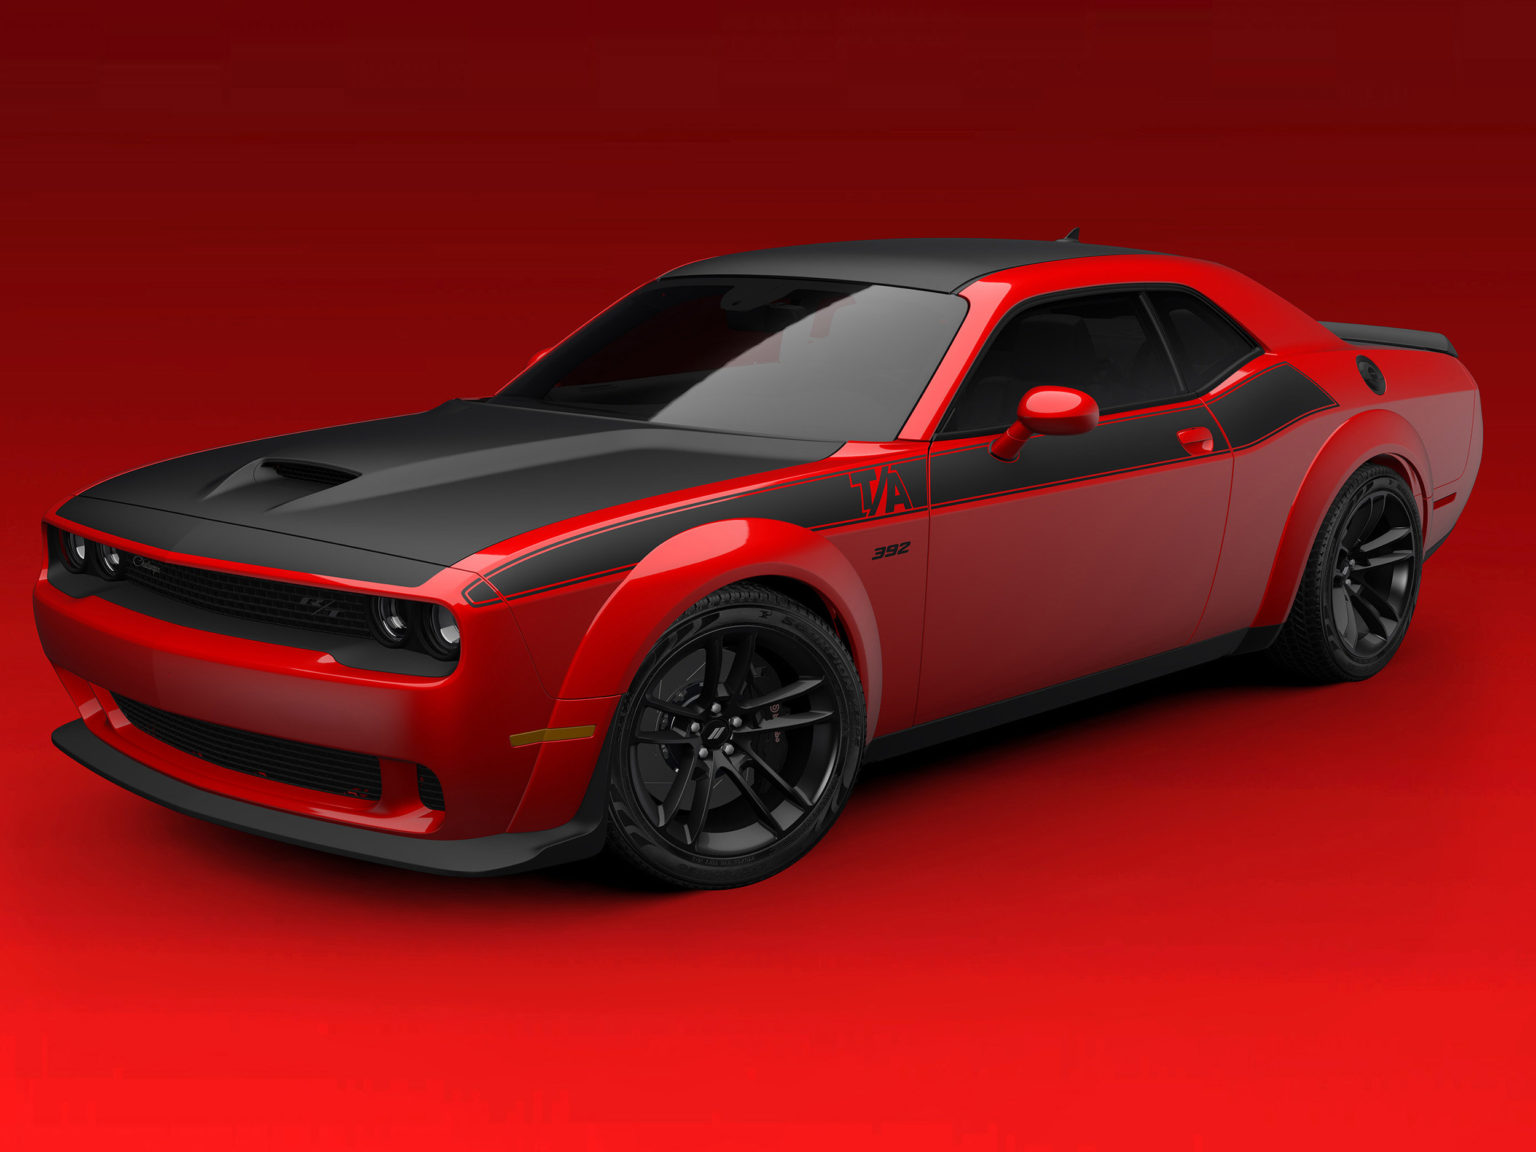 Dodge is extending its widebody styling to more of its lineup.